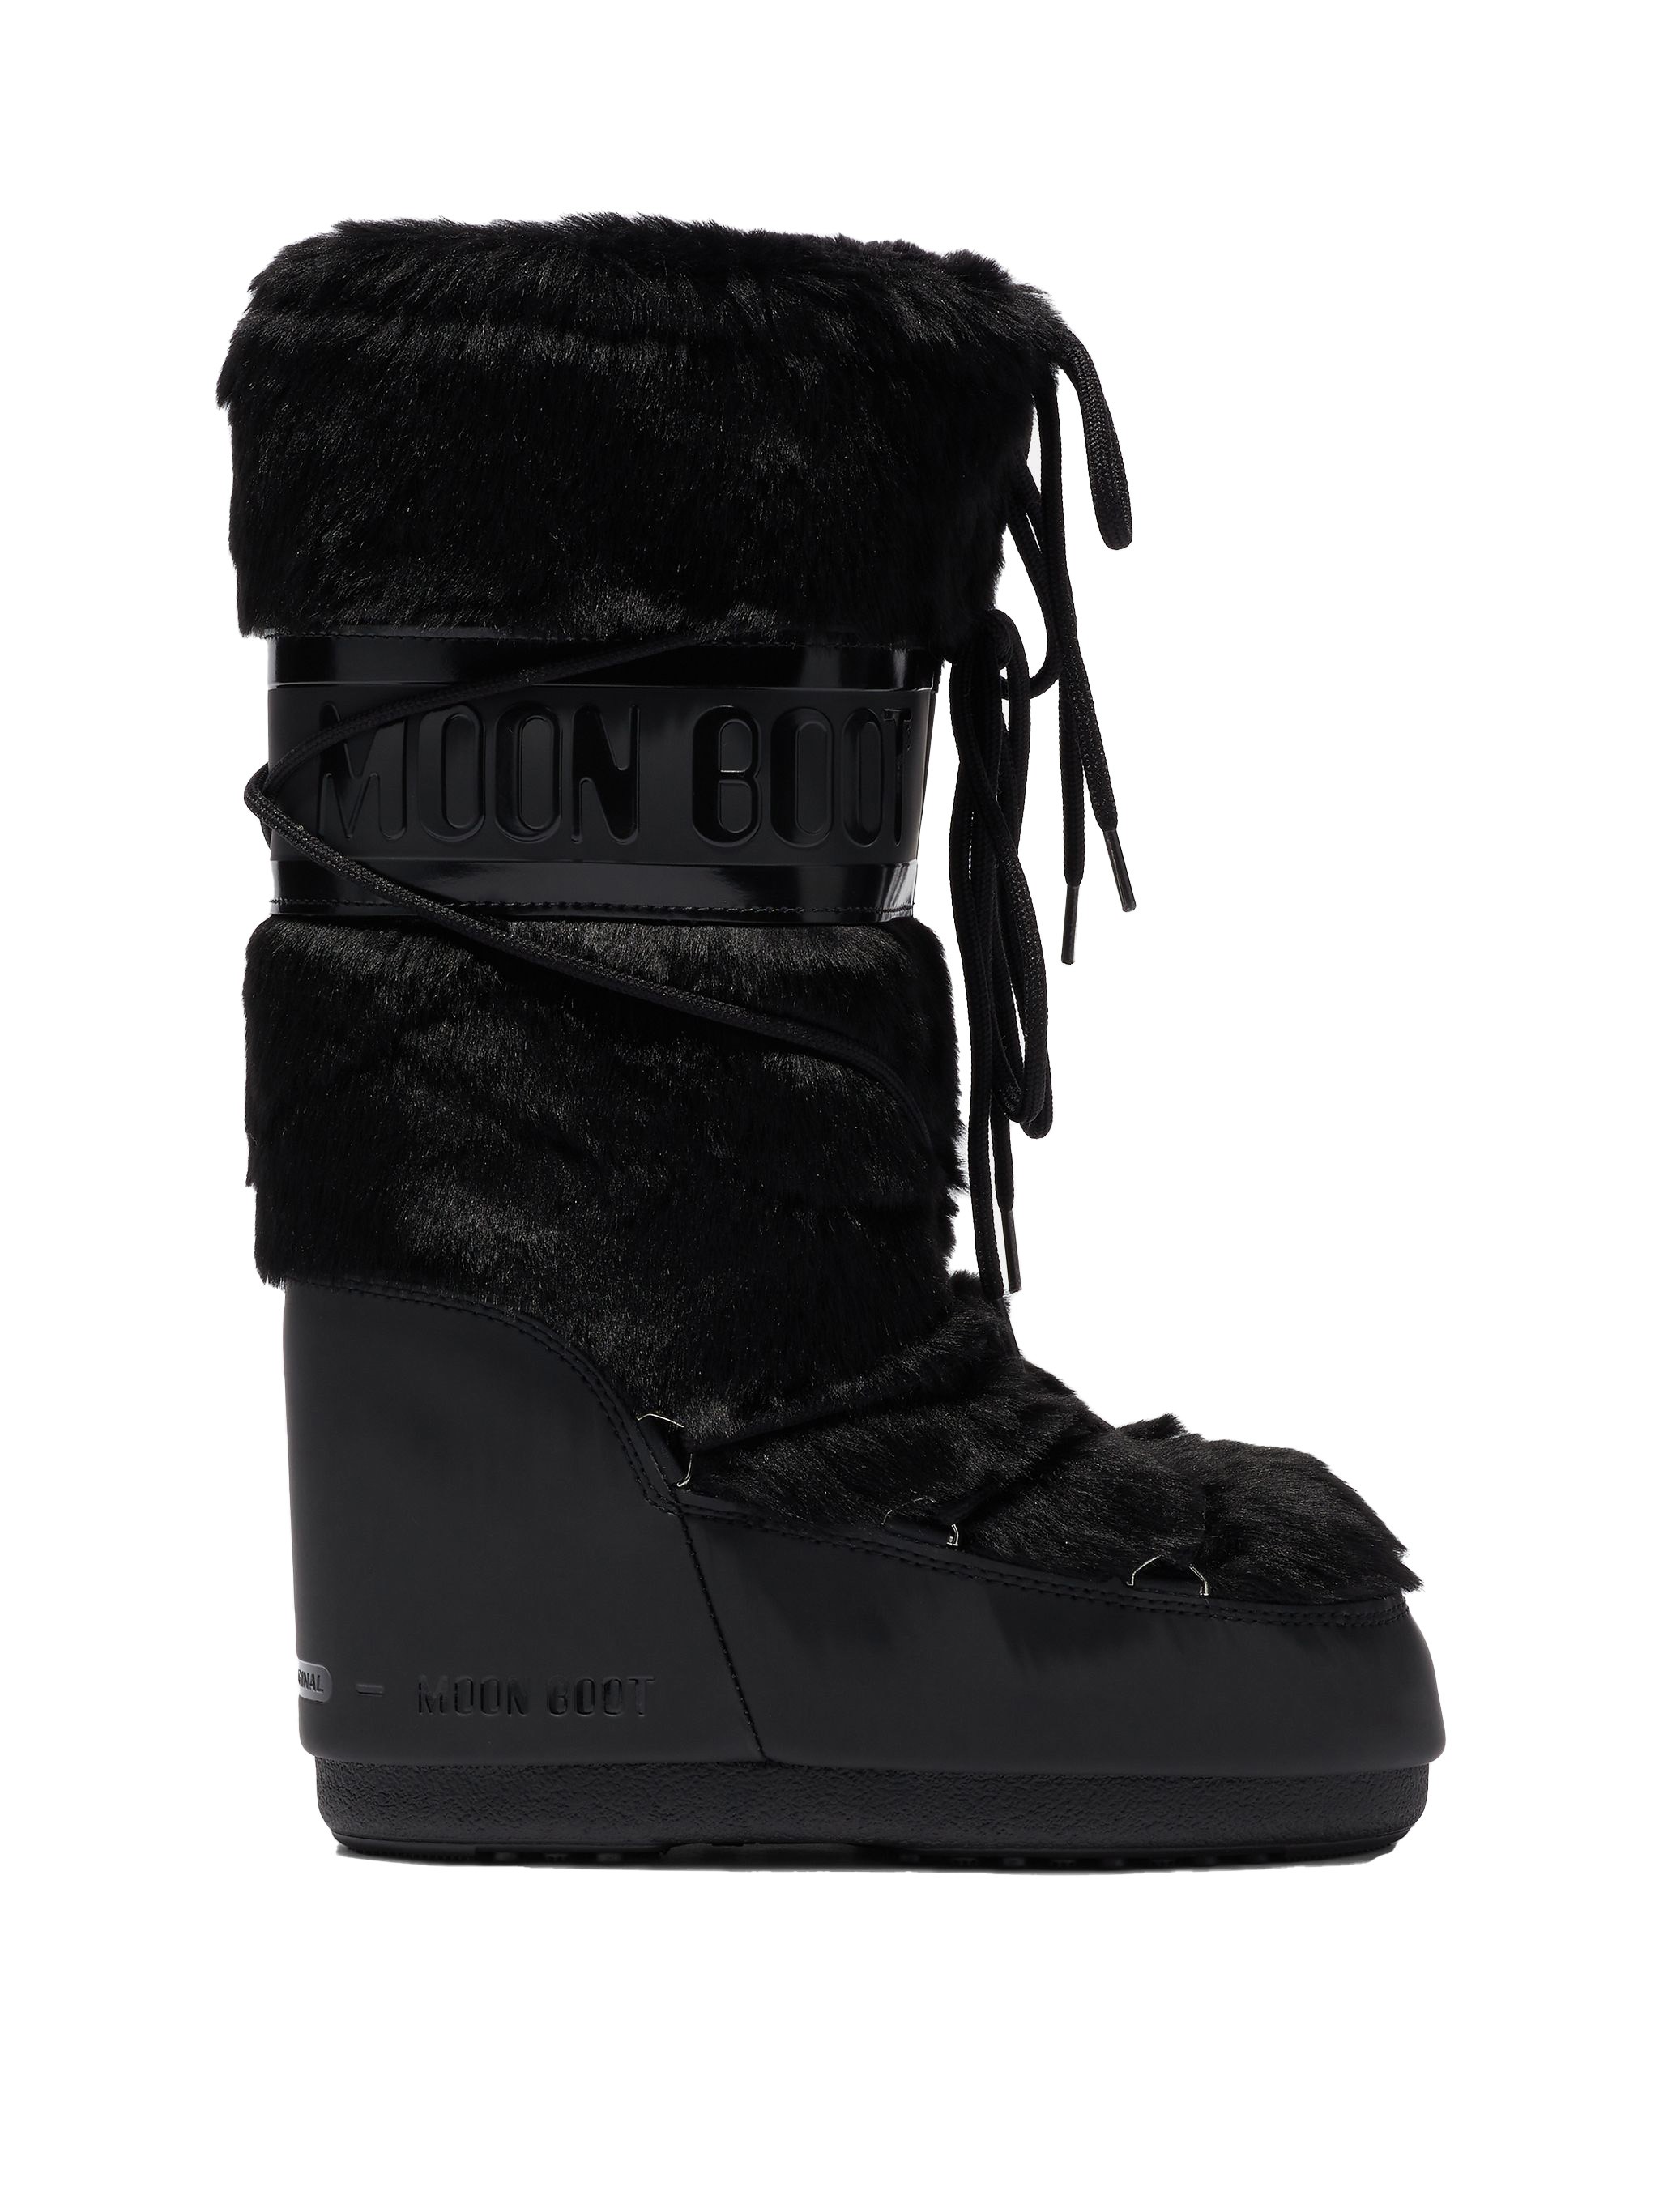 Moon Boot Icon Black Faux-Fur Boots 14089000 001